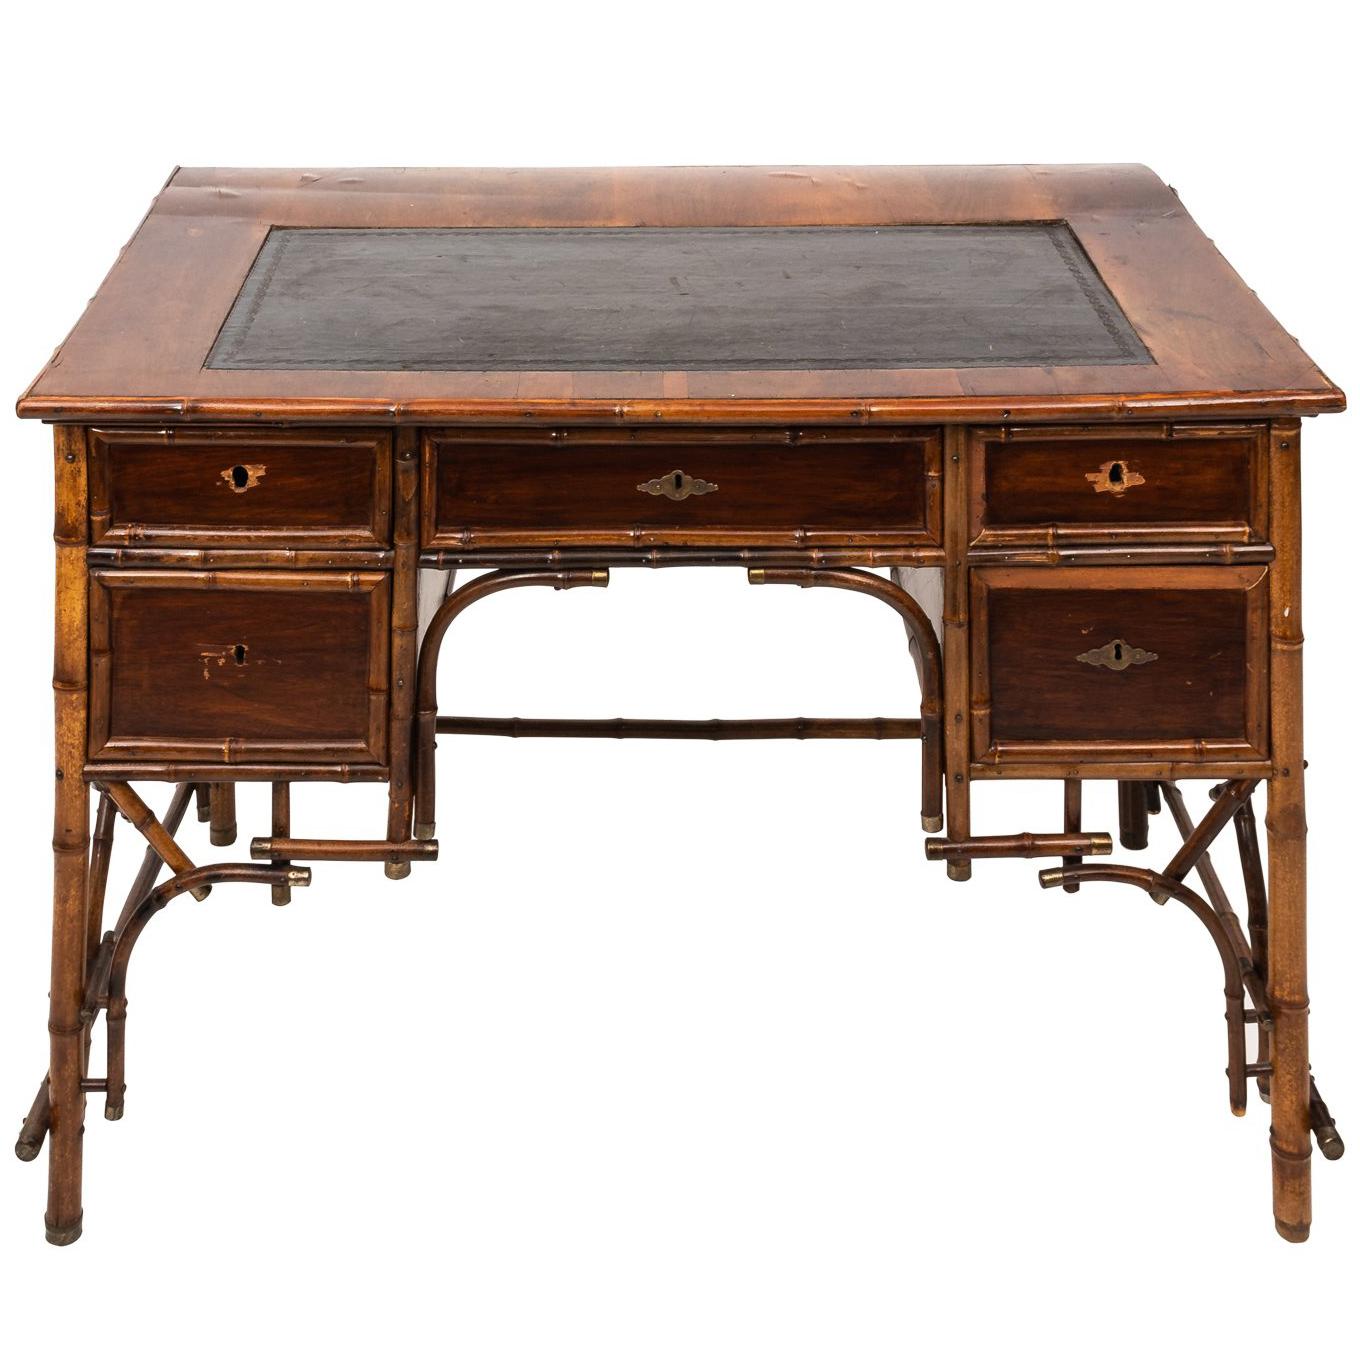 Victorian Bamboo and Leather Desk